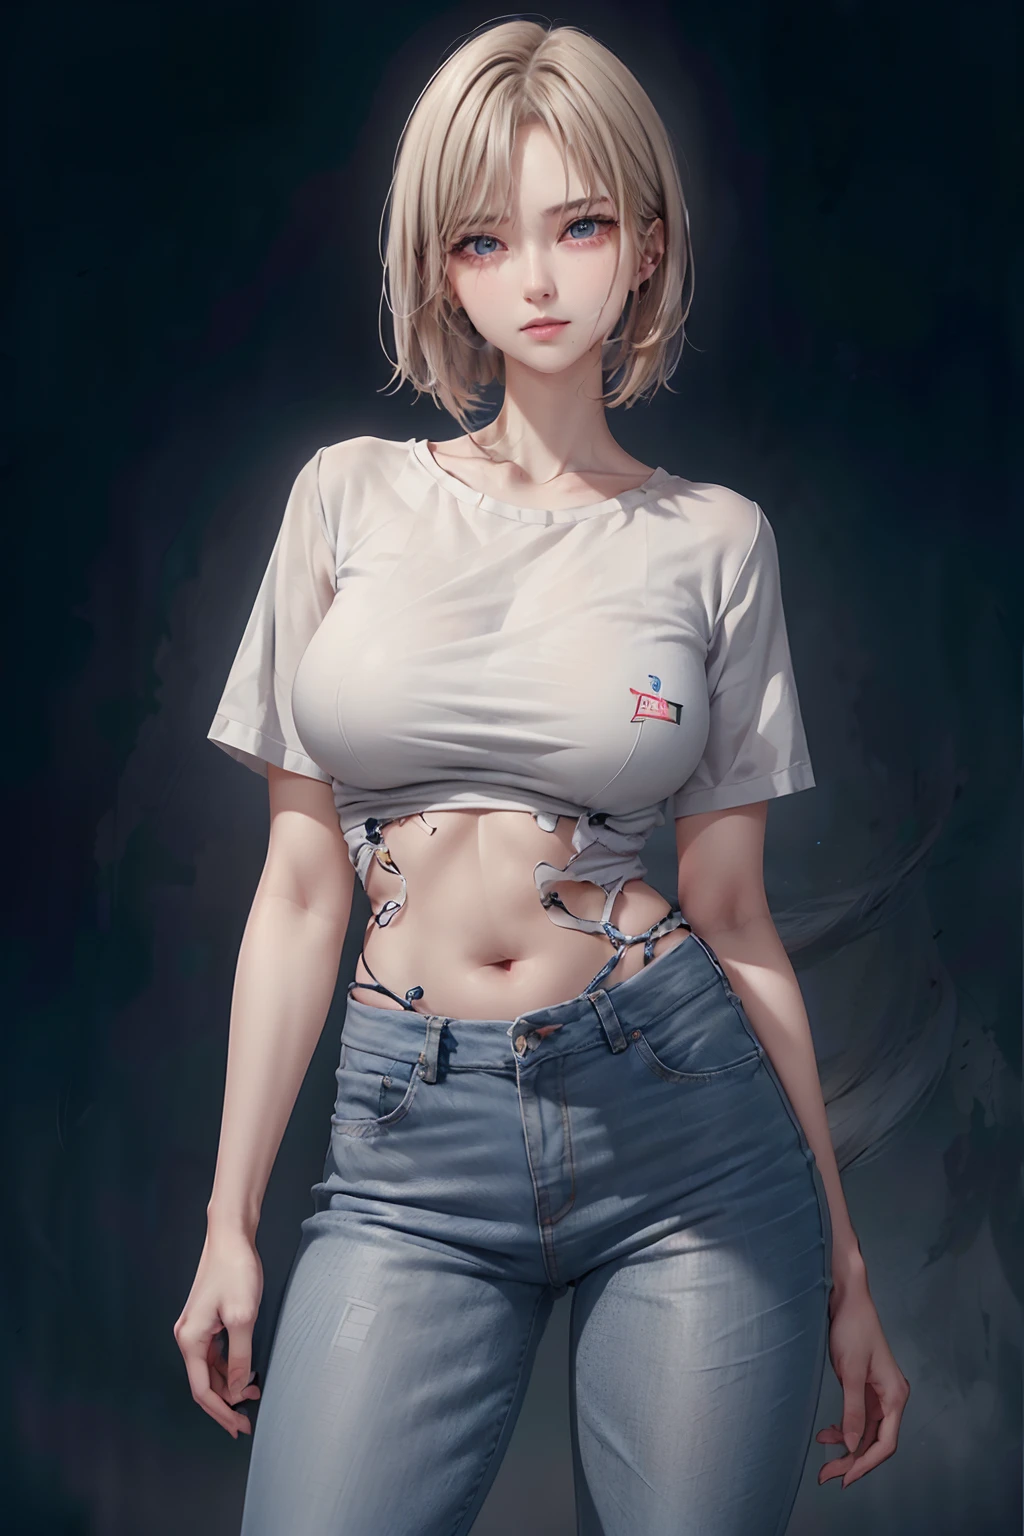 (Best quality:1.2),Masterpiece,(Realism:1.4),
1girll,Android_18,and18,model poses,standing,Blue eyes,parted lip,blond hairbl,Short hair,White shirt,waist circumference,Slender waist,Skinny jeans,Thighs, Thighs,(Large span:1.6),Raised sexy,
Dynamic Angle,
Breasts,